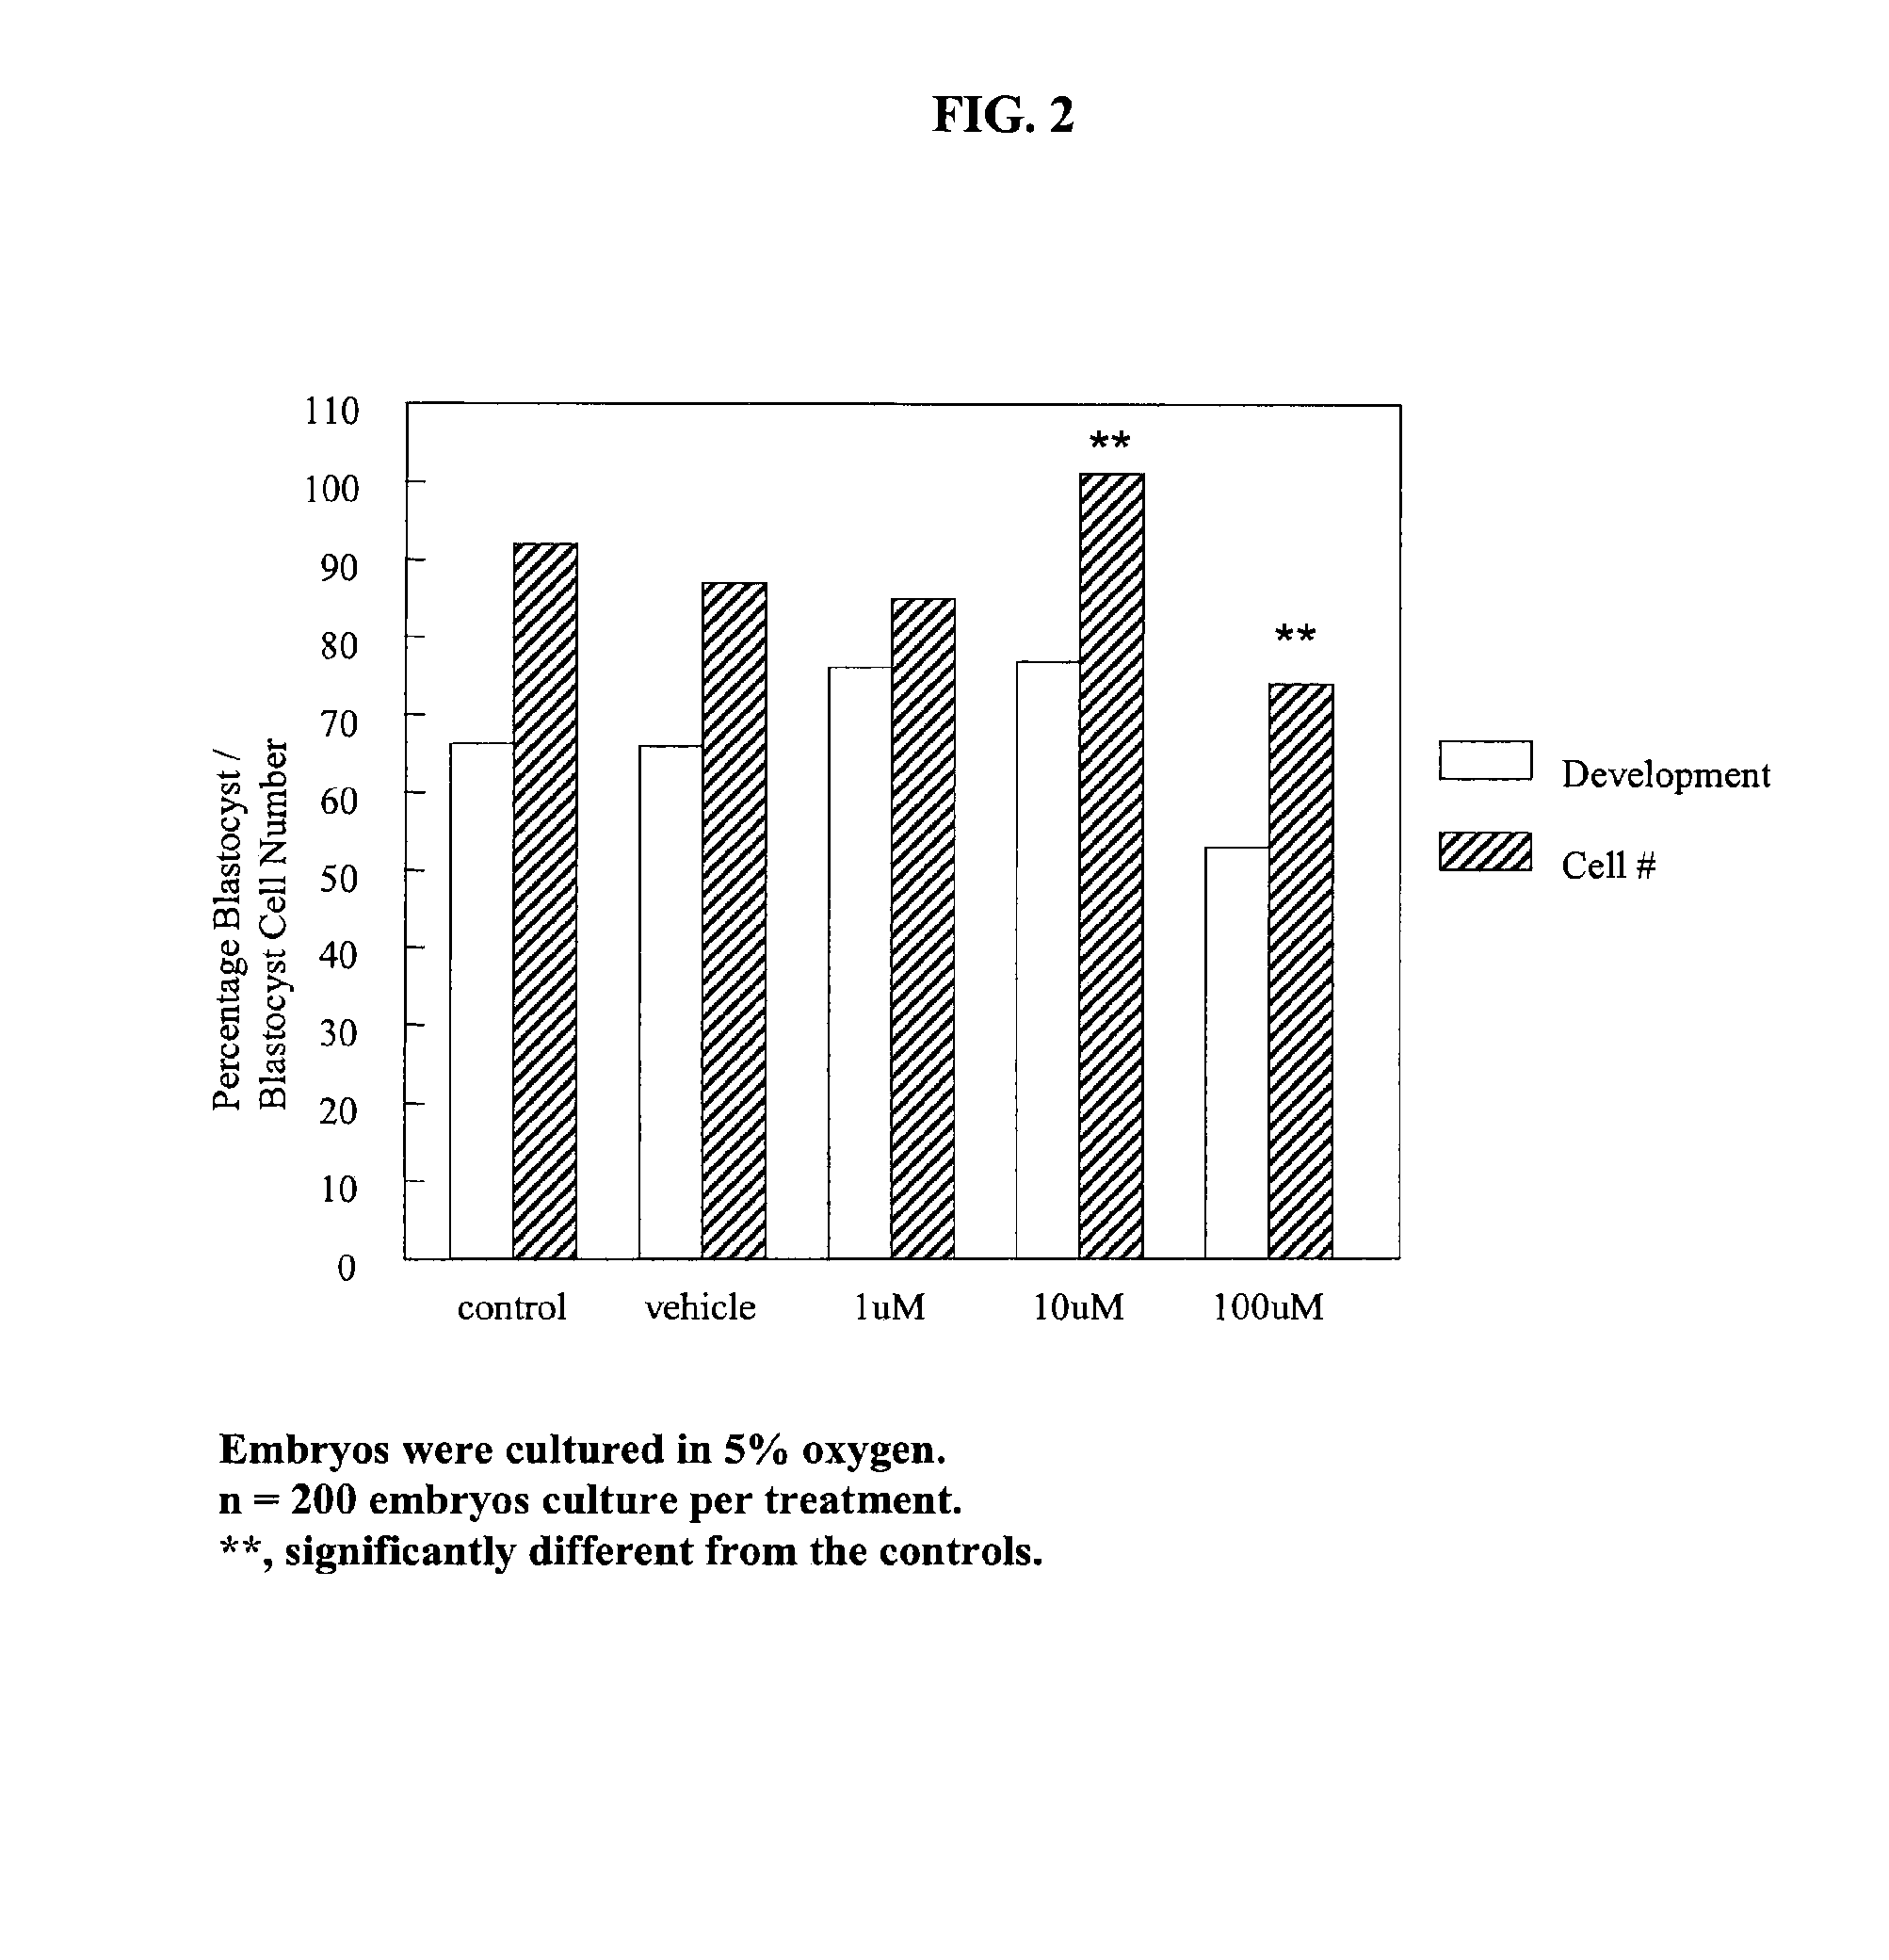 Culture media for developmental cells containing elevated concentrations of lipoic acid